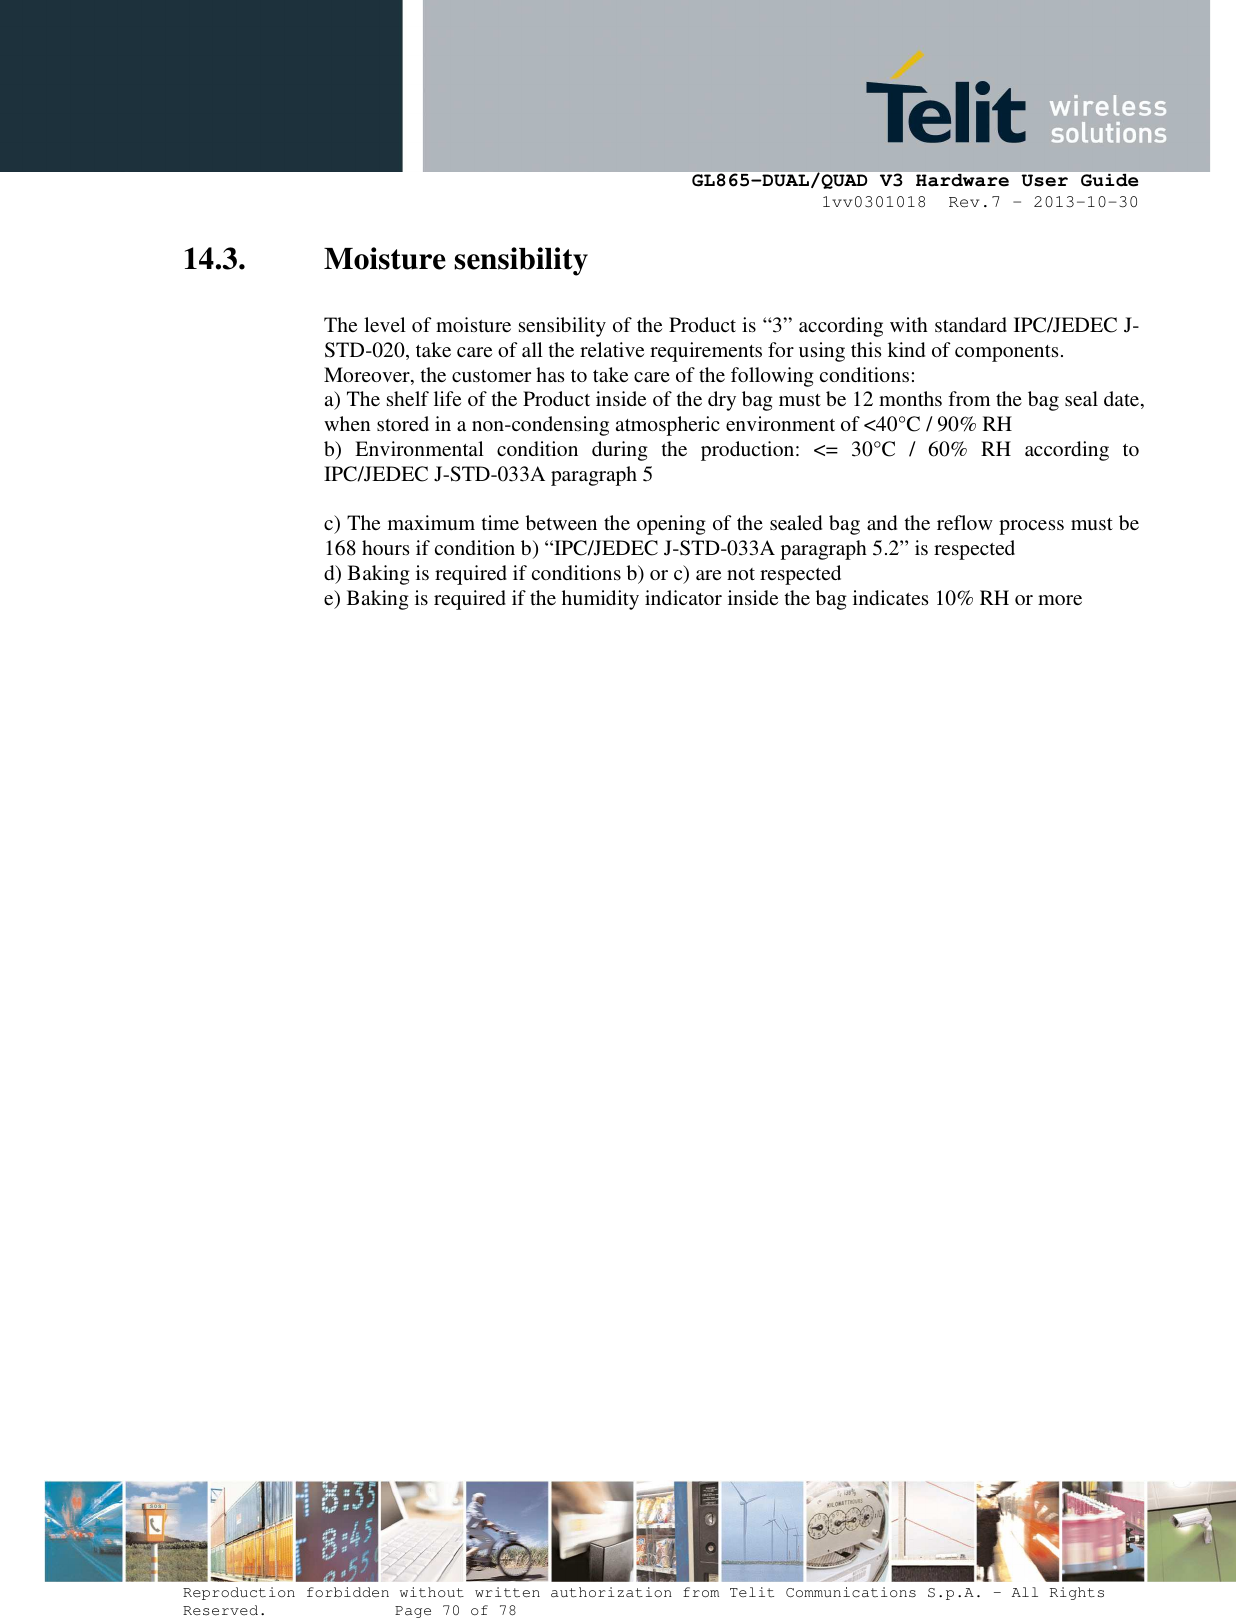      GL865-DUAL/QUAD V3 Hardware User Guide 1vv0301018  Rev.7 – 2013-10-30  Reproduction forbidden without written authorization from Telit Communications S.p.A. - All Rights Reserved.    Page 70 of 78 Mod. 0805 2011-07 Rev.2 14.3. Moisture sensibility  The level of moisture sensibility of the Product is “3” according with standard IPC/JEDEC J-STD-020, take care of all the relative requirements for using this kind of components. Moreover, the customer has to take care of the following conditions: a) The shelf life of the Product inside of the dry bag must be 12 months from the bag seal date, when stored in a non-condensing atmospheric environment of &lt;40°C / 90% RH b)  Environmental  condition  during  the  production:  &lt;=  30°C  /  60%  RH  according  to IPC/JEDEC J-STD-033A paragraph 5  c) The maximum time between the opening of the sealed bag and the reflow process must be 168 hours if condition b) “IPC/JEDEC J-STD-033A paragraph 5.2” is respected d) Baking is required if conditions b) or c) are not respected e) Baking is required if the humidity indicator inside the bag indicates 10% RH or more  